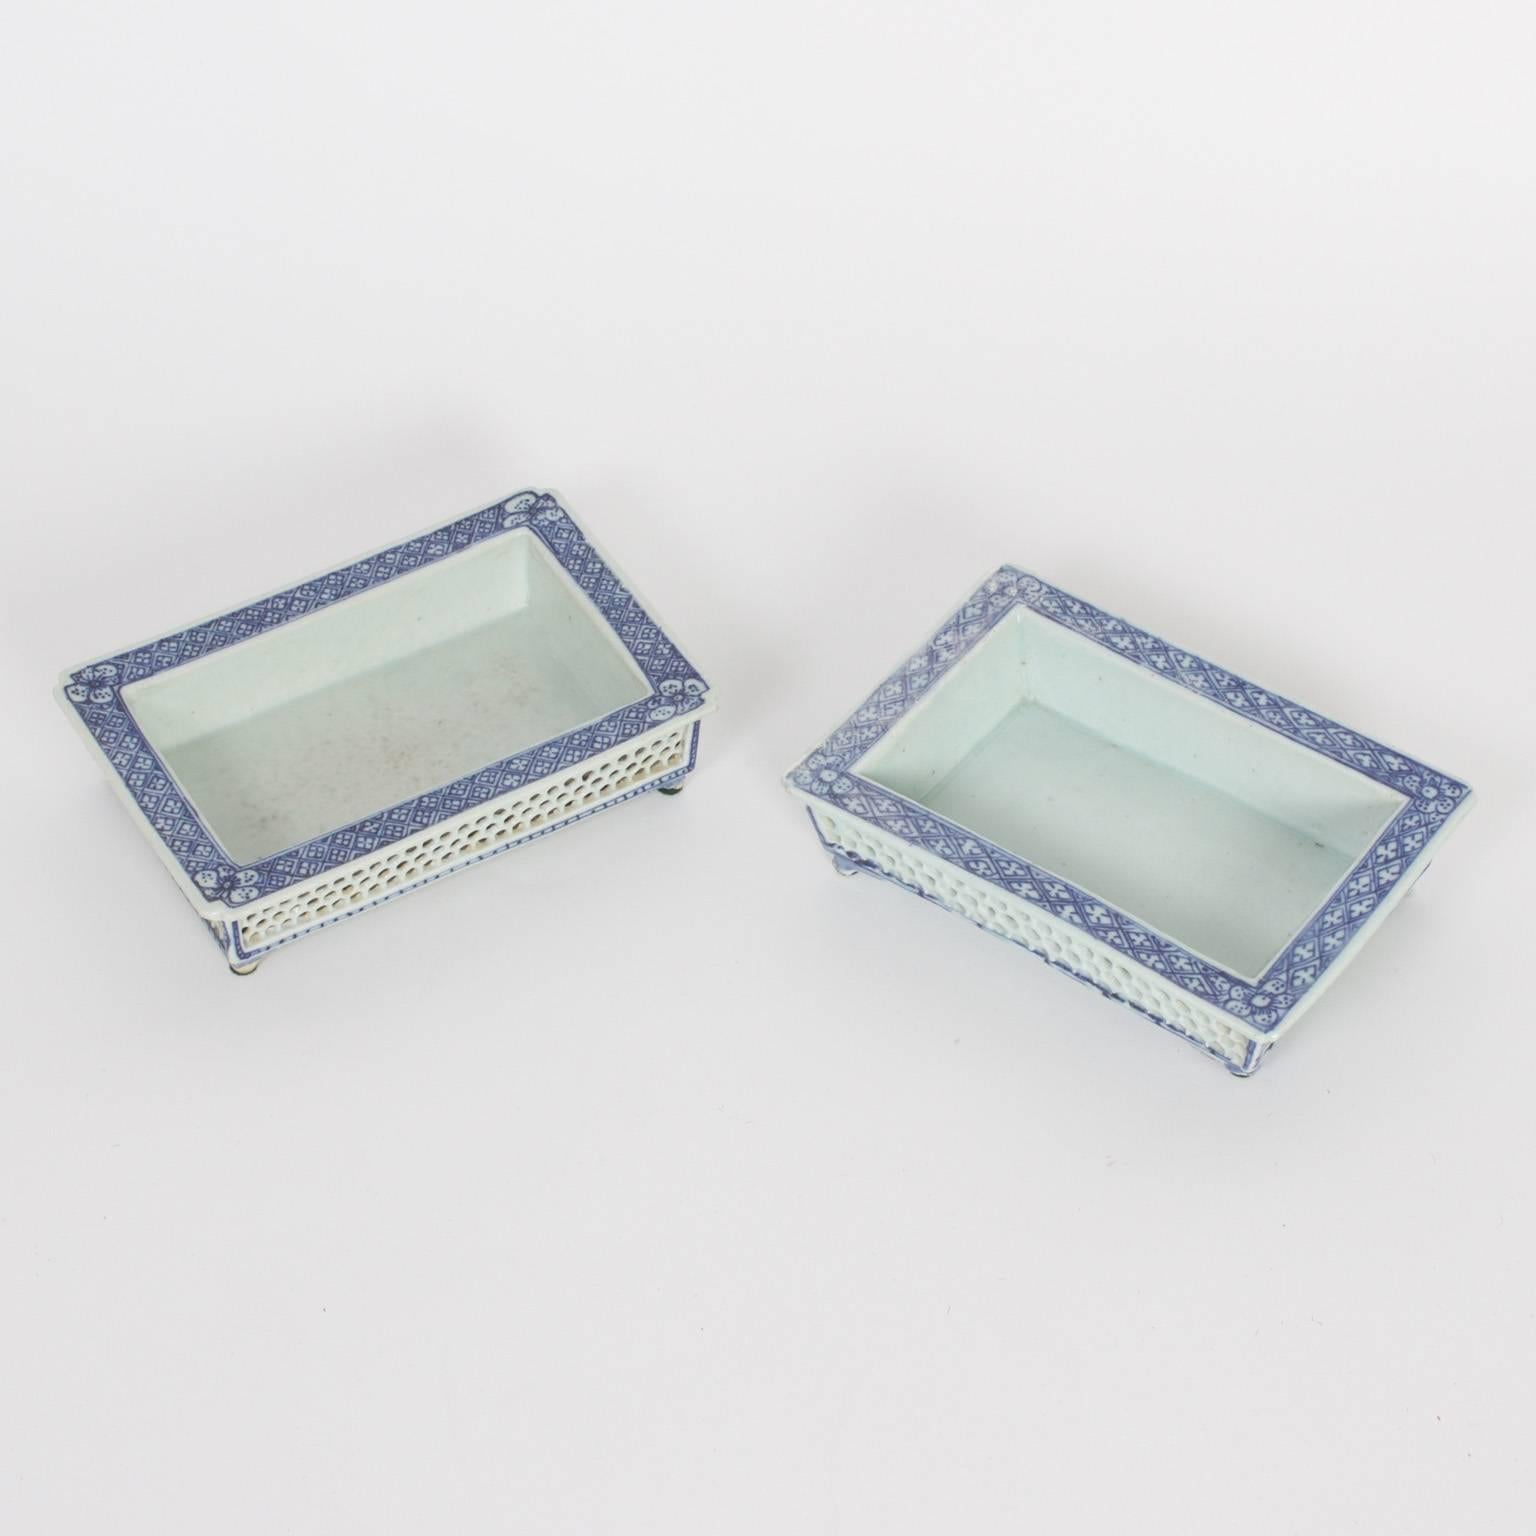 Two Chinese export porcelain blue and white narcissus trays with their distinctive form, floral decorations, reticulated sides and petite feet. Priced individually.
 